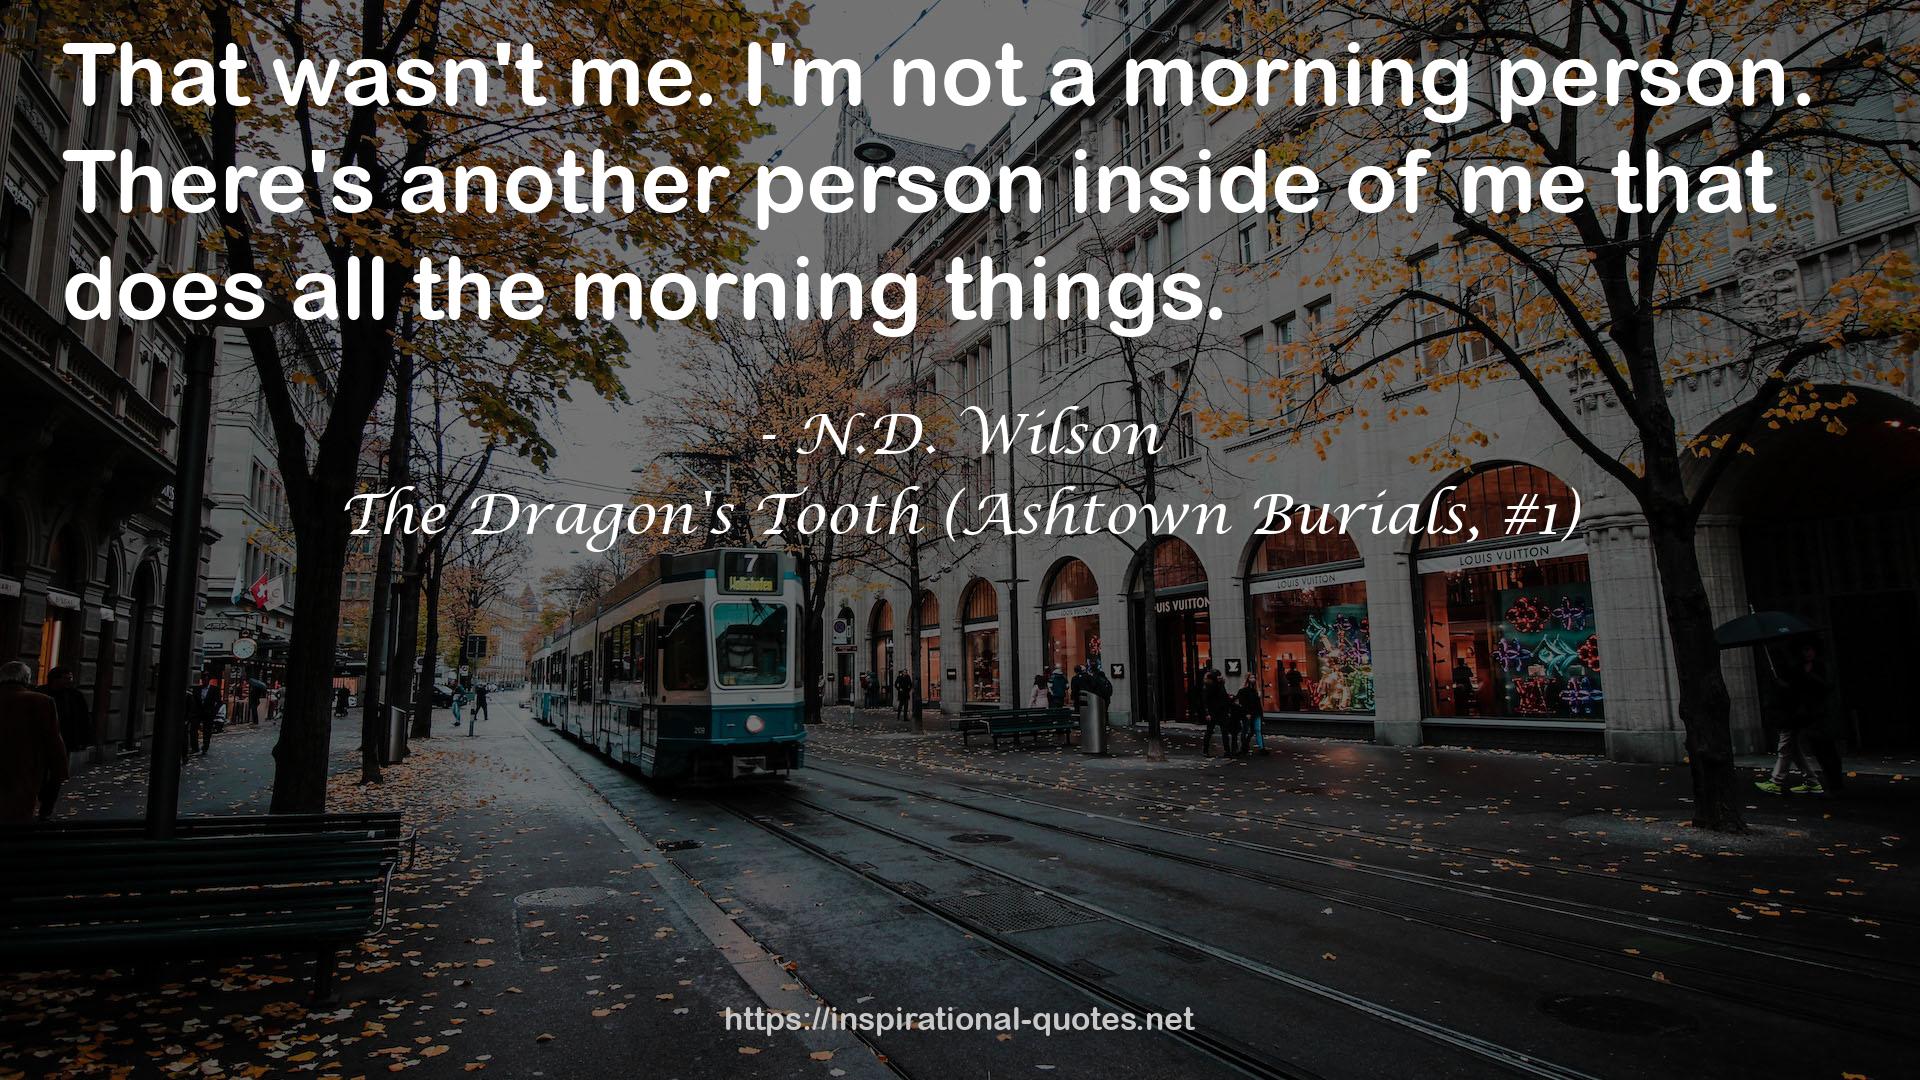 The Dragon's Tooth (Ashtown Burials, #1) QUOTES